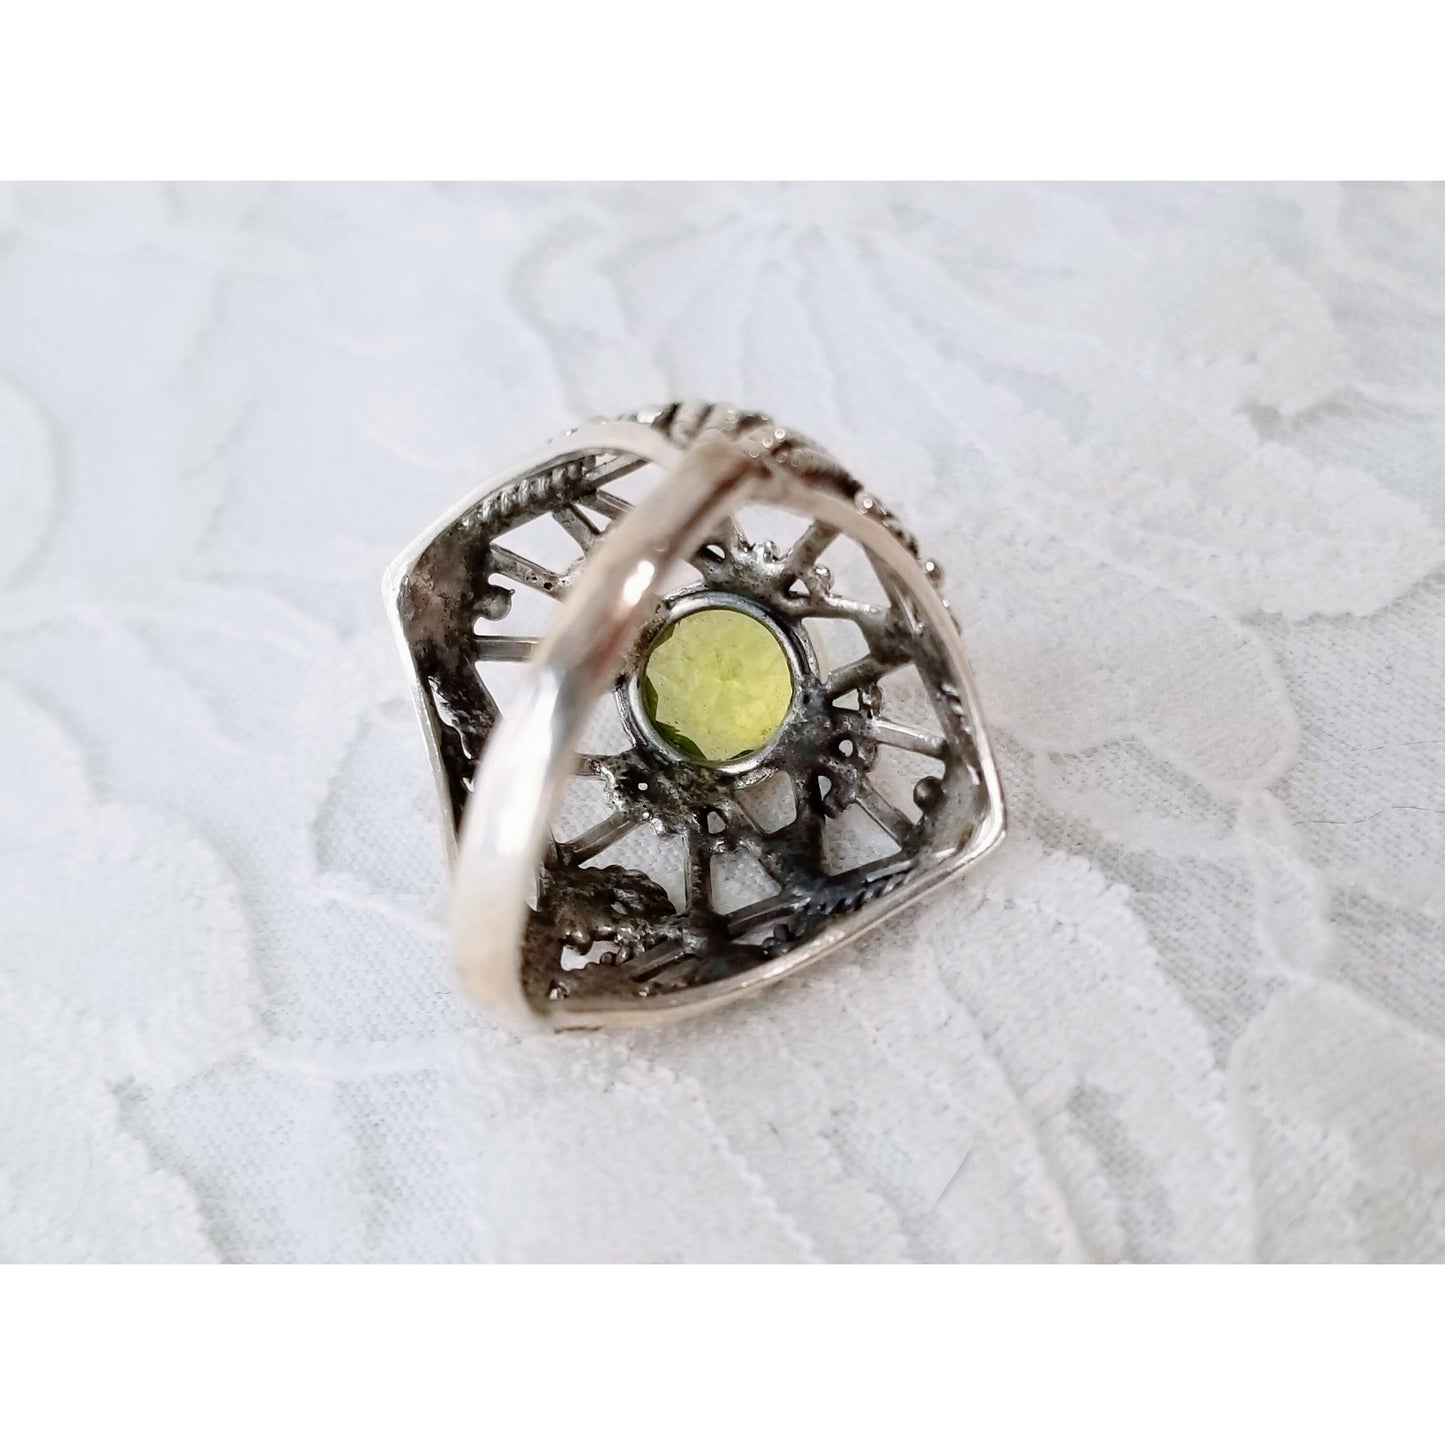 Victorian Filigree RING Peridot 925 Solid Sterling Silver Filigree Ring Jewelry Art Deco Style Ring ~ Size 9 ~ Esoteric Stone